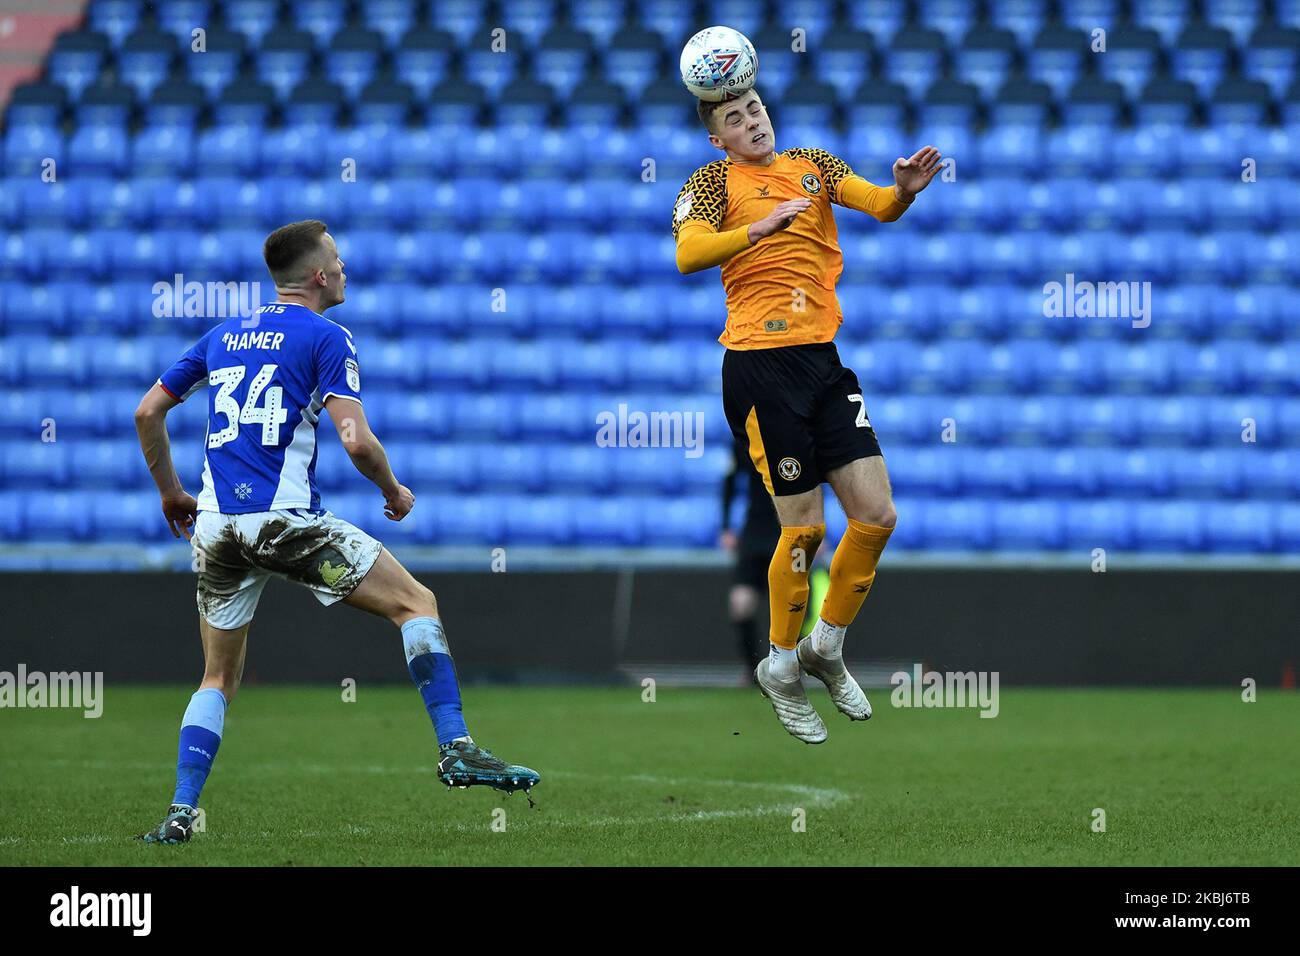 Tom Hamer of Oldham Athletic and Lewis Collins of Newport County during the Sky Bet League 2 match between Oldham Athletic and Newport County at Boundary Park, Oldham on Saturday 29th February 2020. (Photo by Eddie Garvey/MI News/NurPhoto) Stock Photo